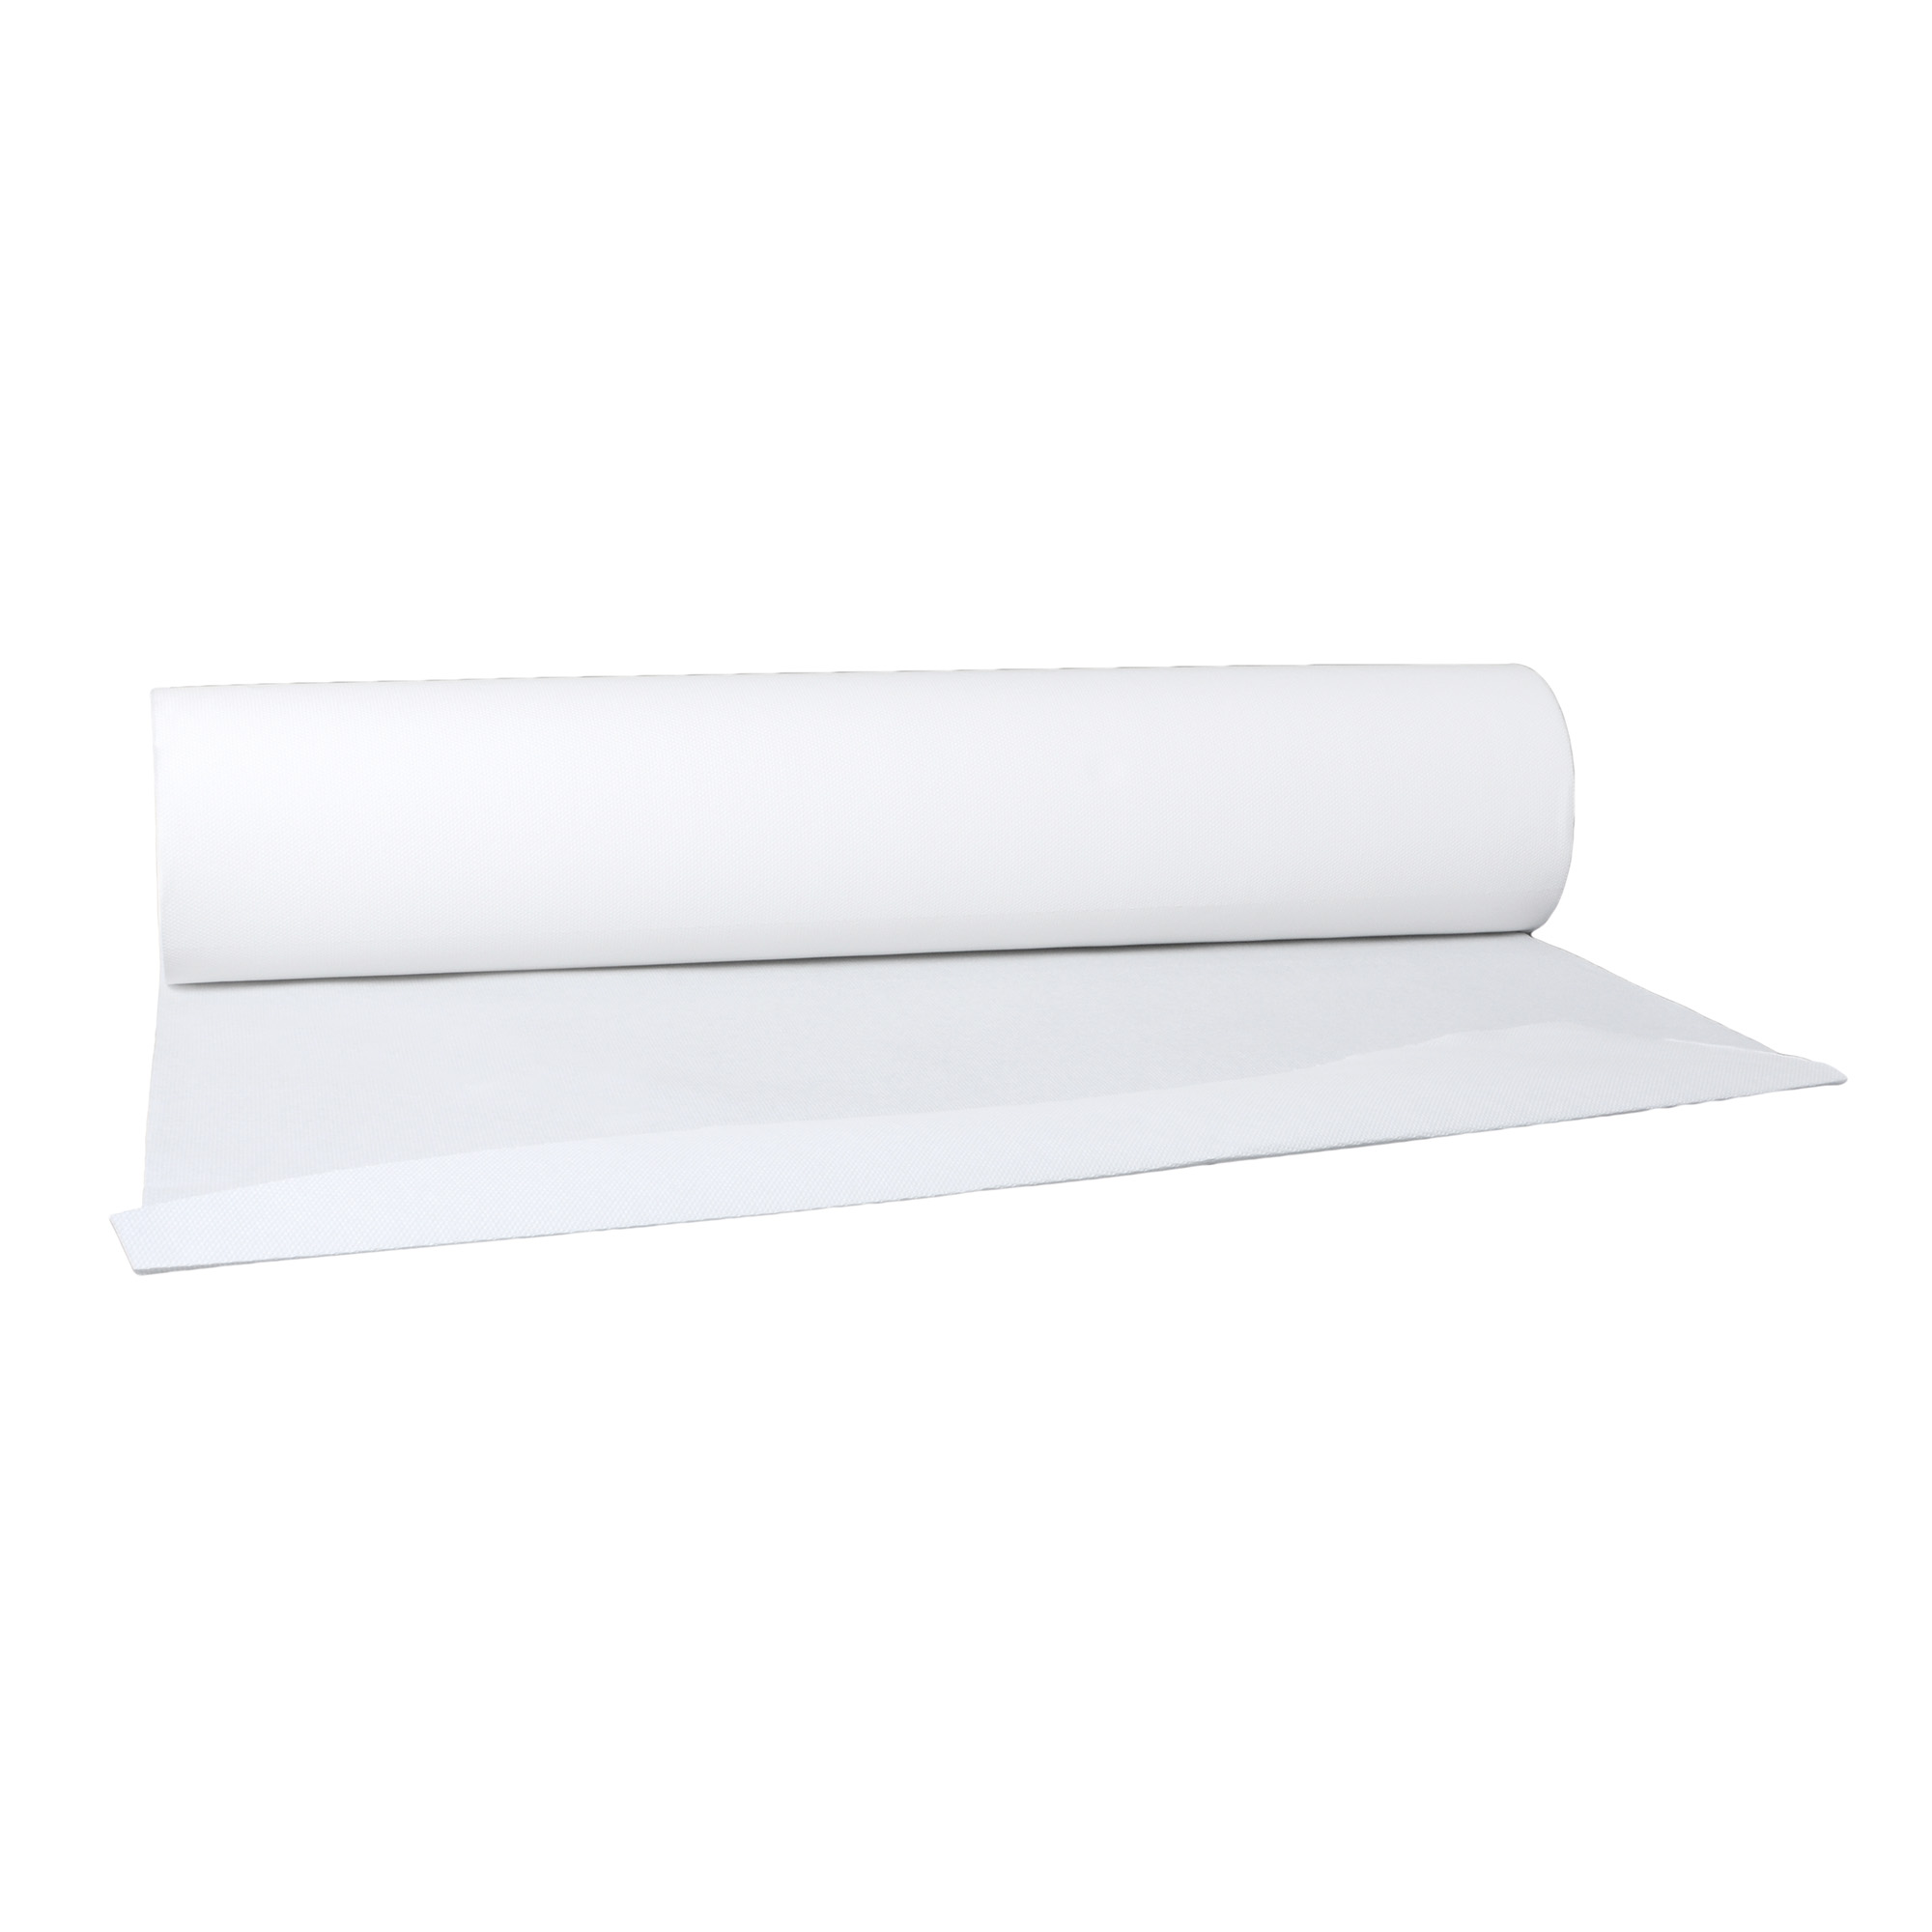 MaiMed Doctor's Crepe Paper, white, 2-ply, 50cmx50m, 1 pc.